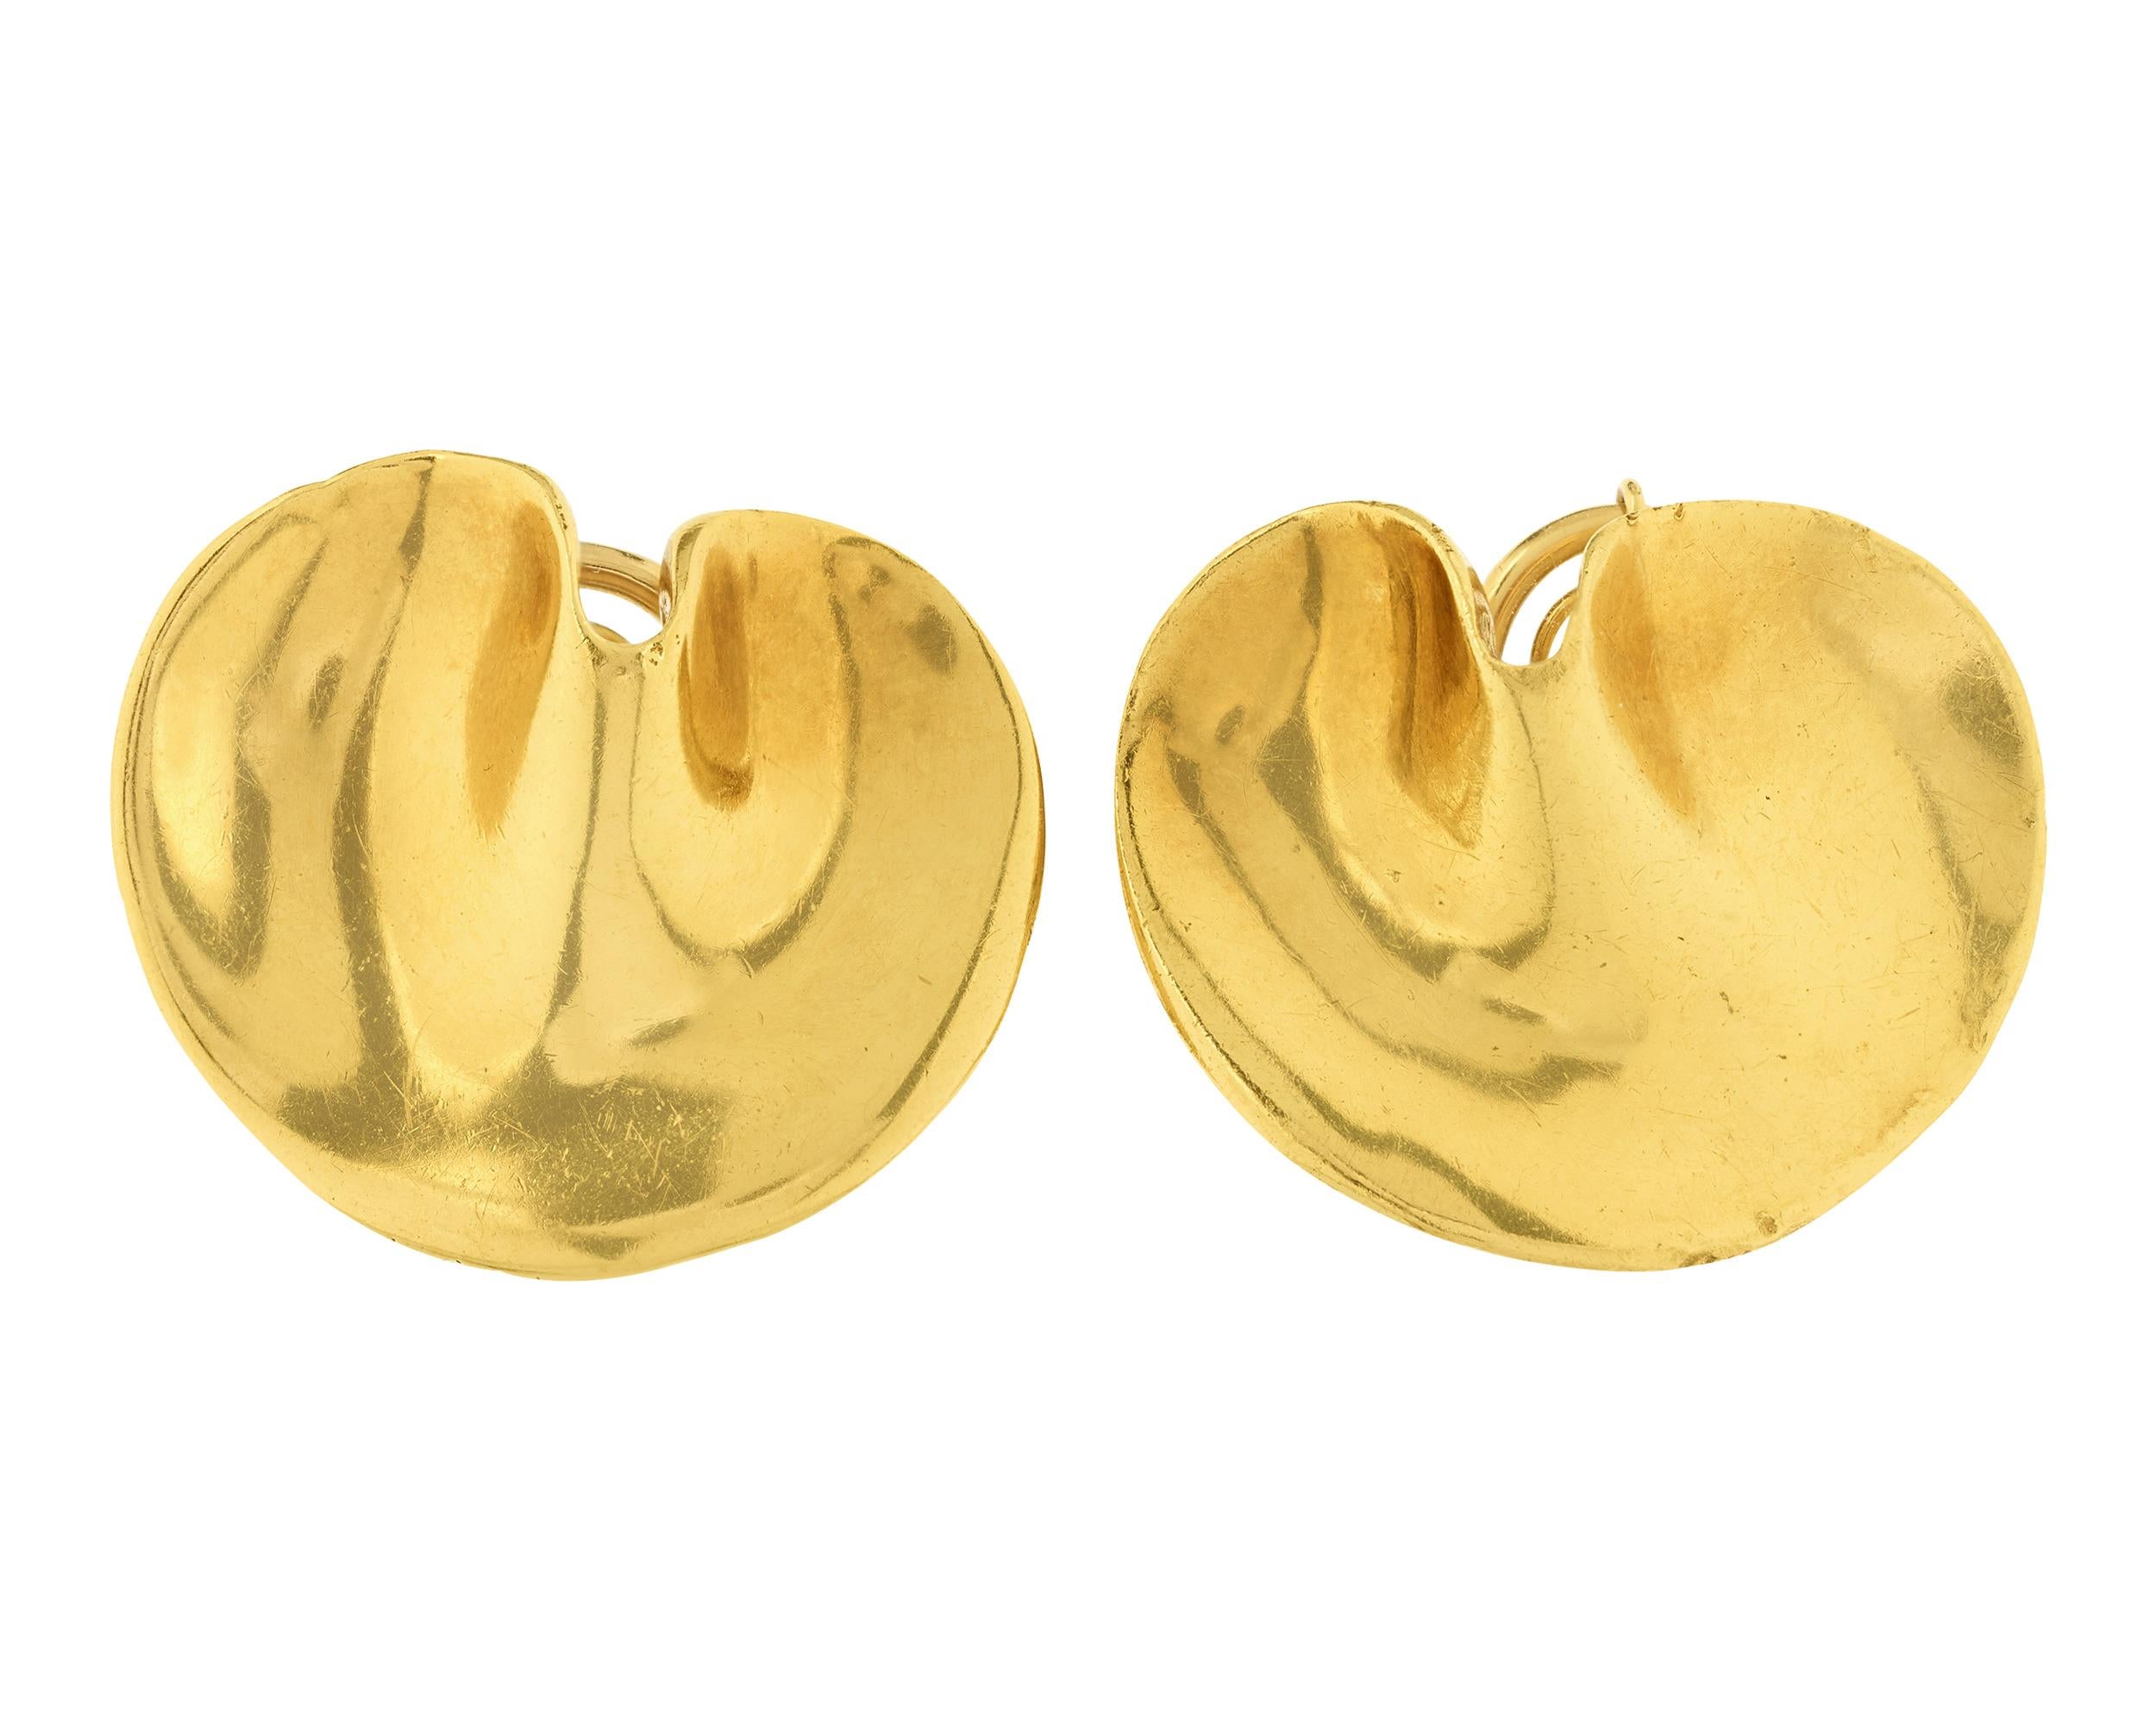 Tiffany & Co. Gold Lily Pad Earrings In Excellent Condition For Sale In New Orleans, LA